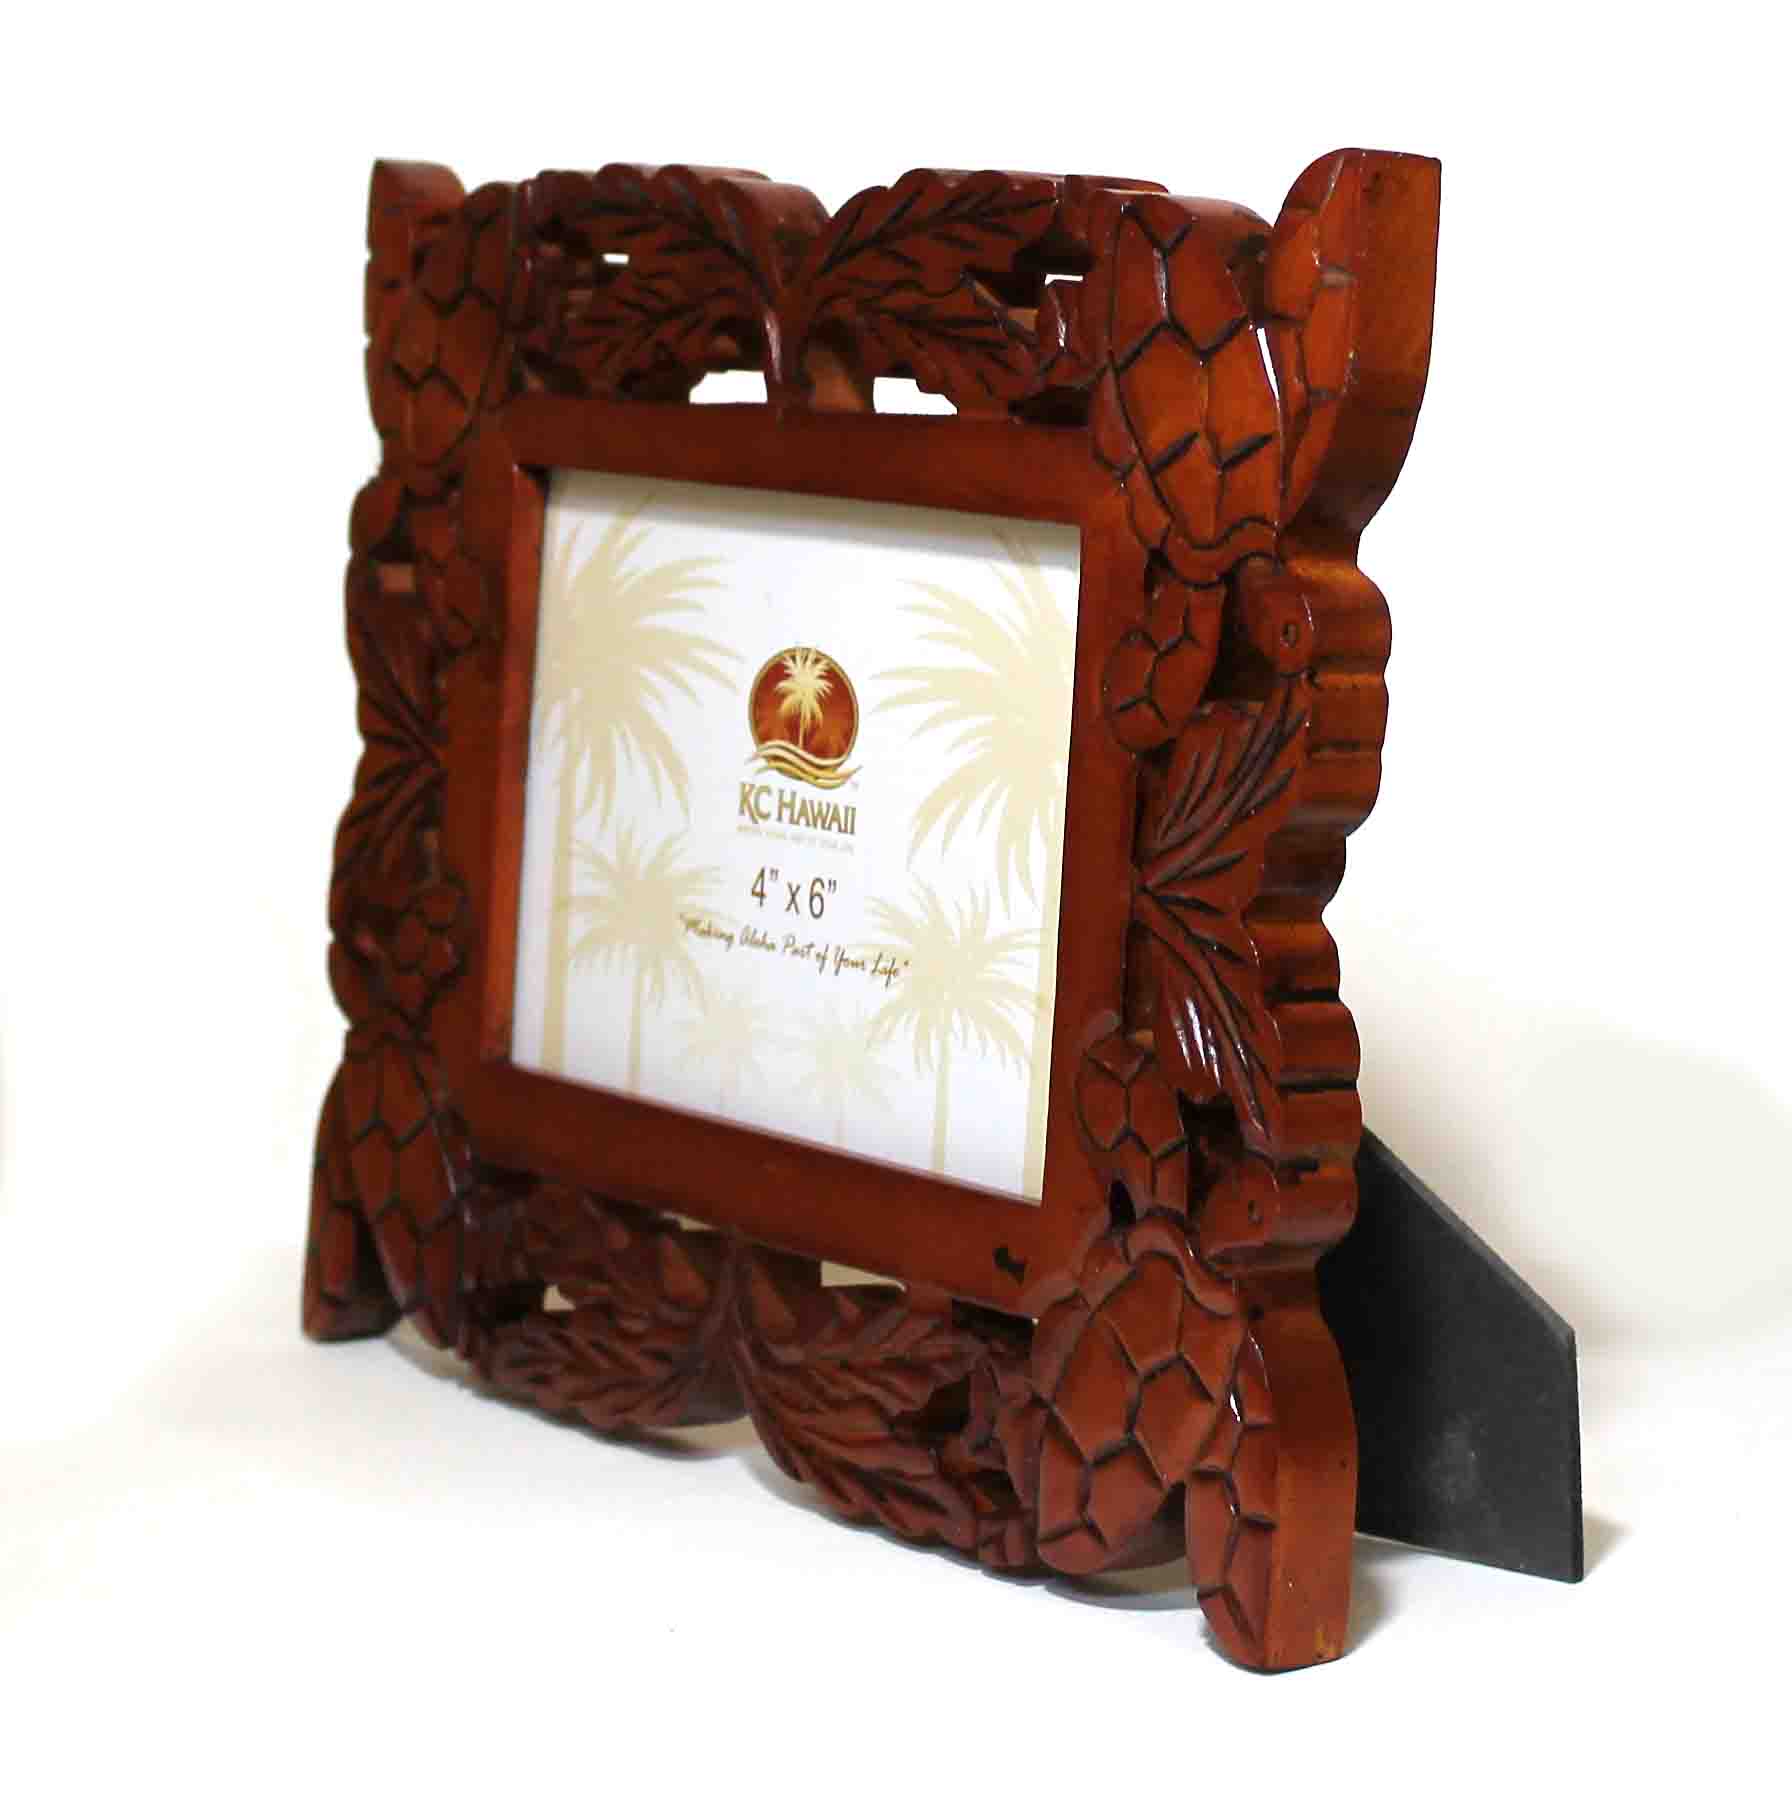 ytHgt[z Tropical Carved Wood Picture Frame - Honu^CeApi^CeA^tHgt[